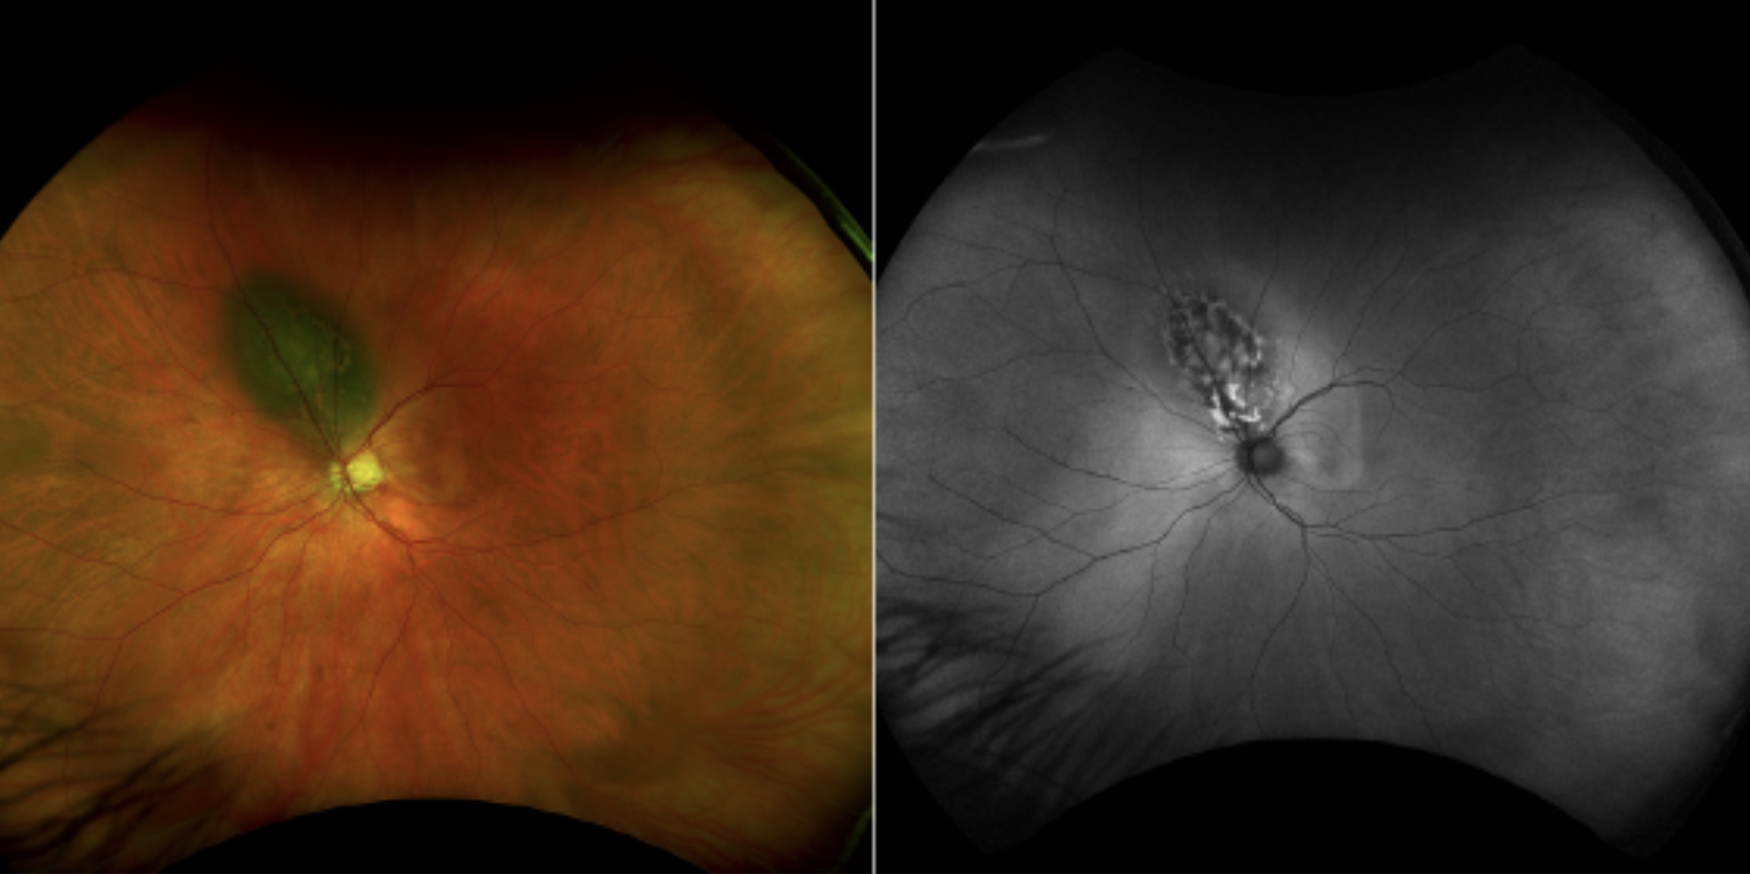 A 57-year-old Caucasian male presented with acute complaints of blurry vision in the left eye. His ocular history was unremarkable with last dilated exam the year prior.